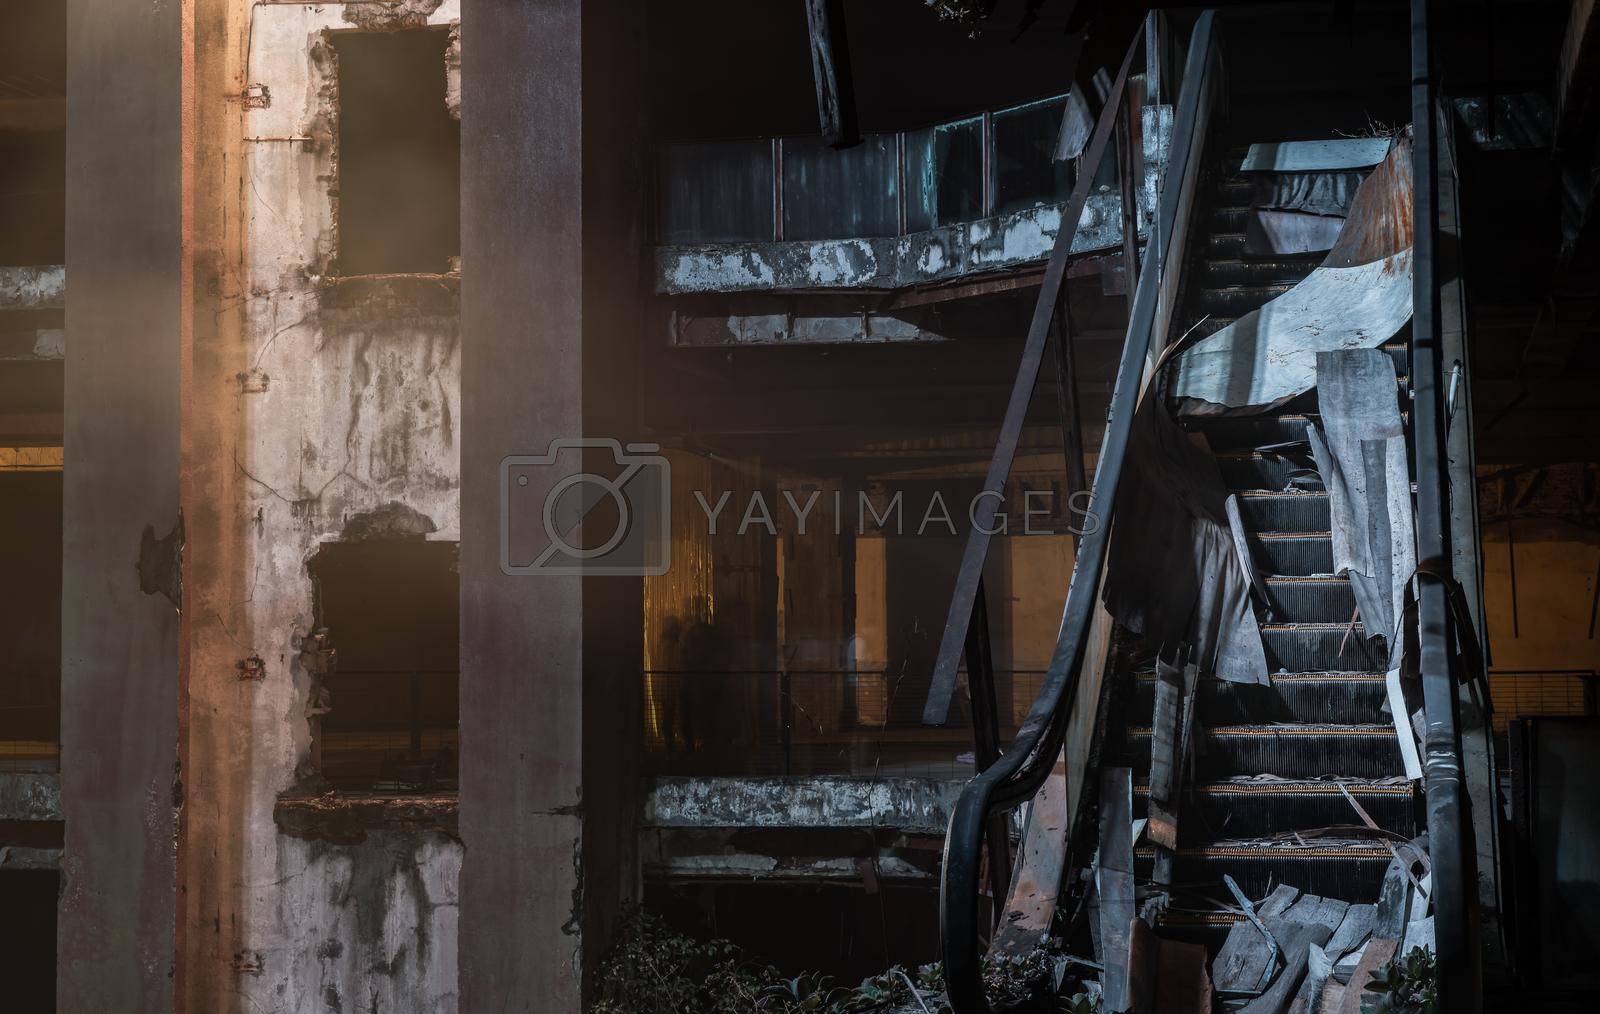 Damaged escalator in abandoned shopping mall building. Structural and ruins was left to deteriorate over time, New World Mall, Selective focus.